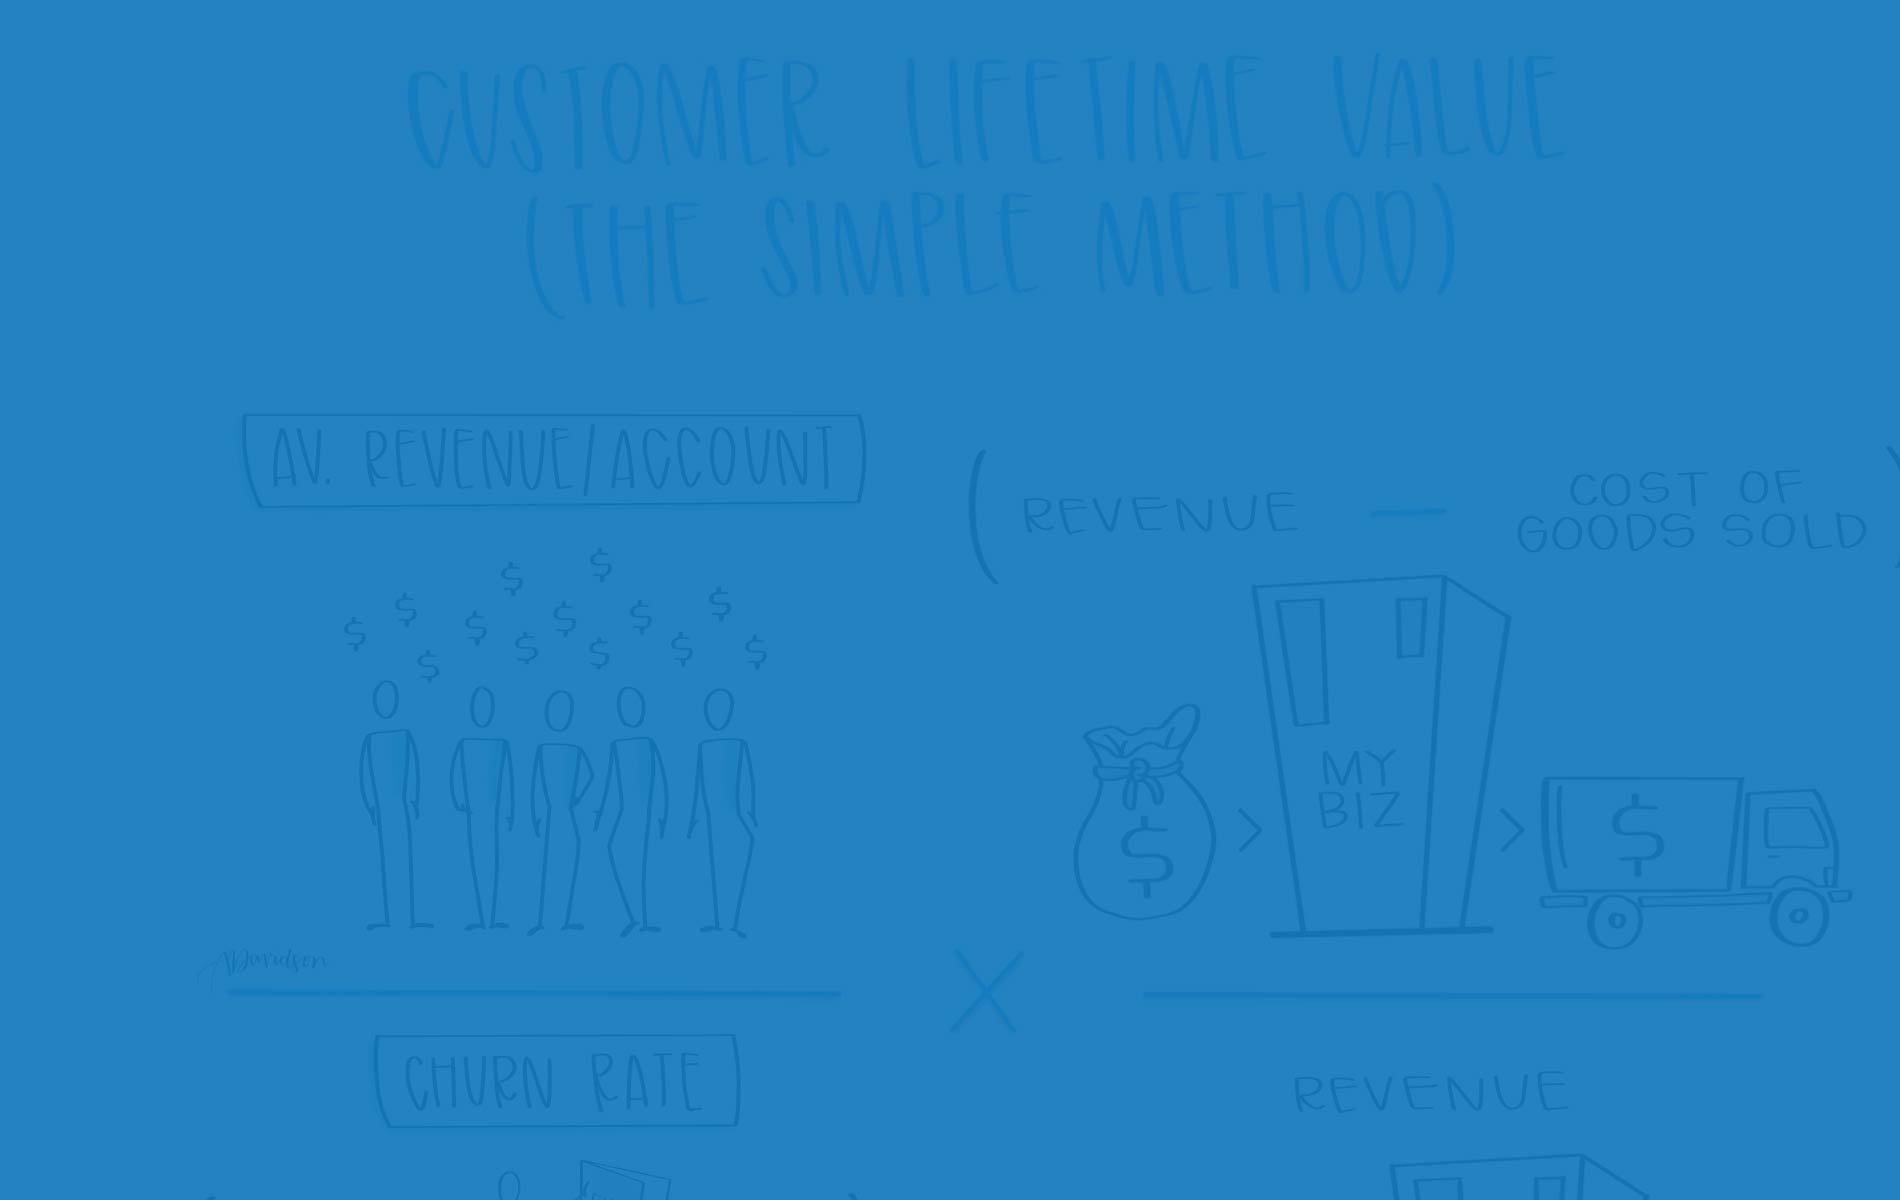 What is Customer Lifetime Value?